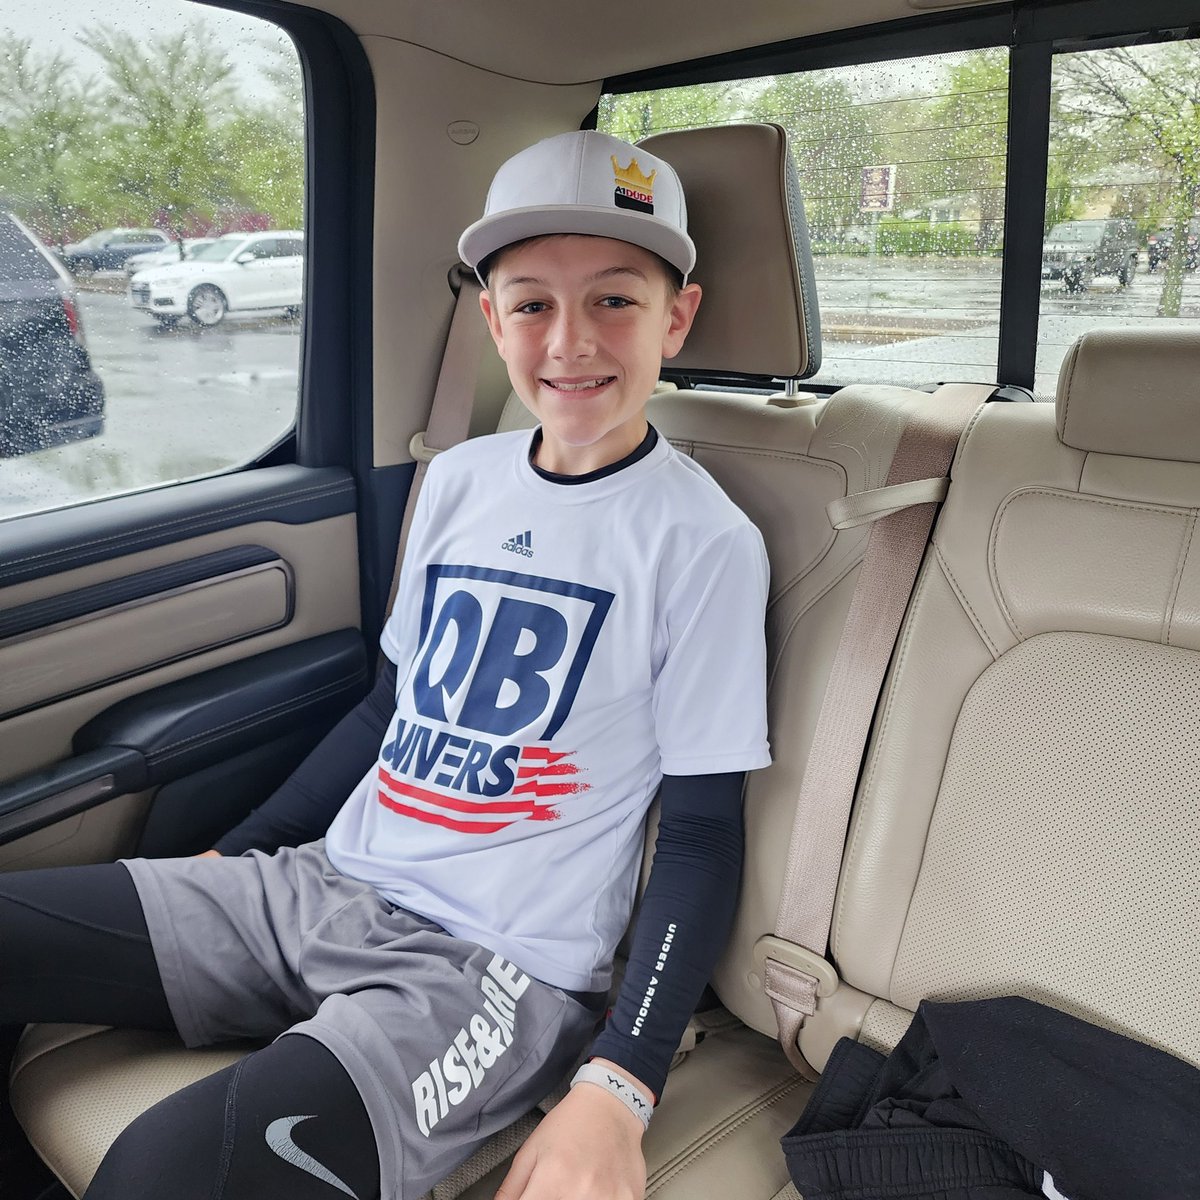 the FBU camp today before check in.. Tell me you went to a lot of camps without telling me you went to a lot of camps.@A1DUDES hat @QBUniverseQBU shirt, @NxtLevelAtx shorts, lol time for some @FBUcamp swag @AndrewSFlorio @QBHitList @quarterbackmag @TheQBEngineer